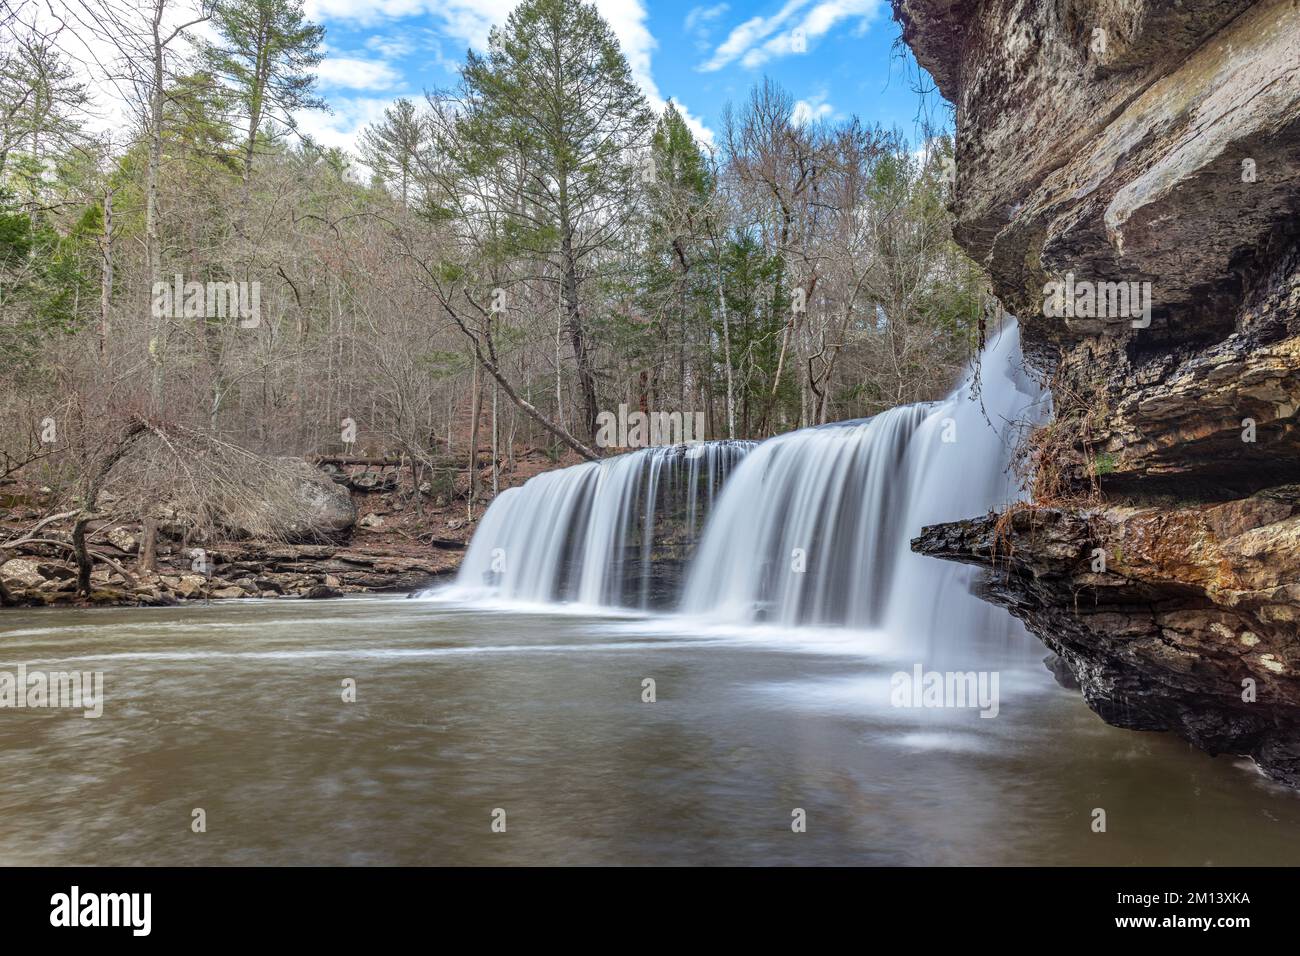 Potter's Falls in Eastern Tennessee on the Cumberland Plateau is a beautiful wilderness area showing the natural flow of fresh river water cascading o Stock Photo